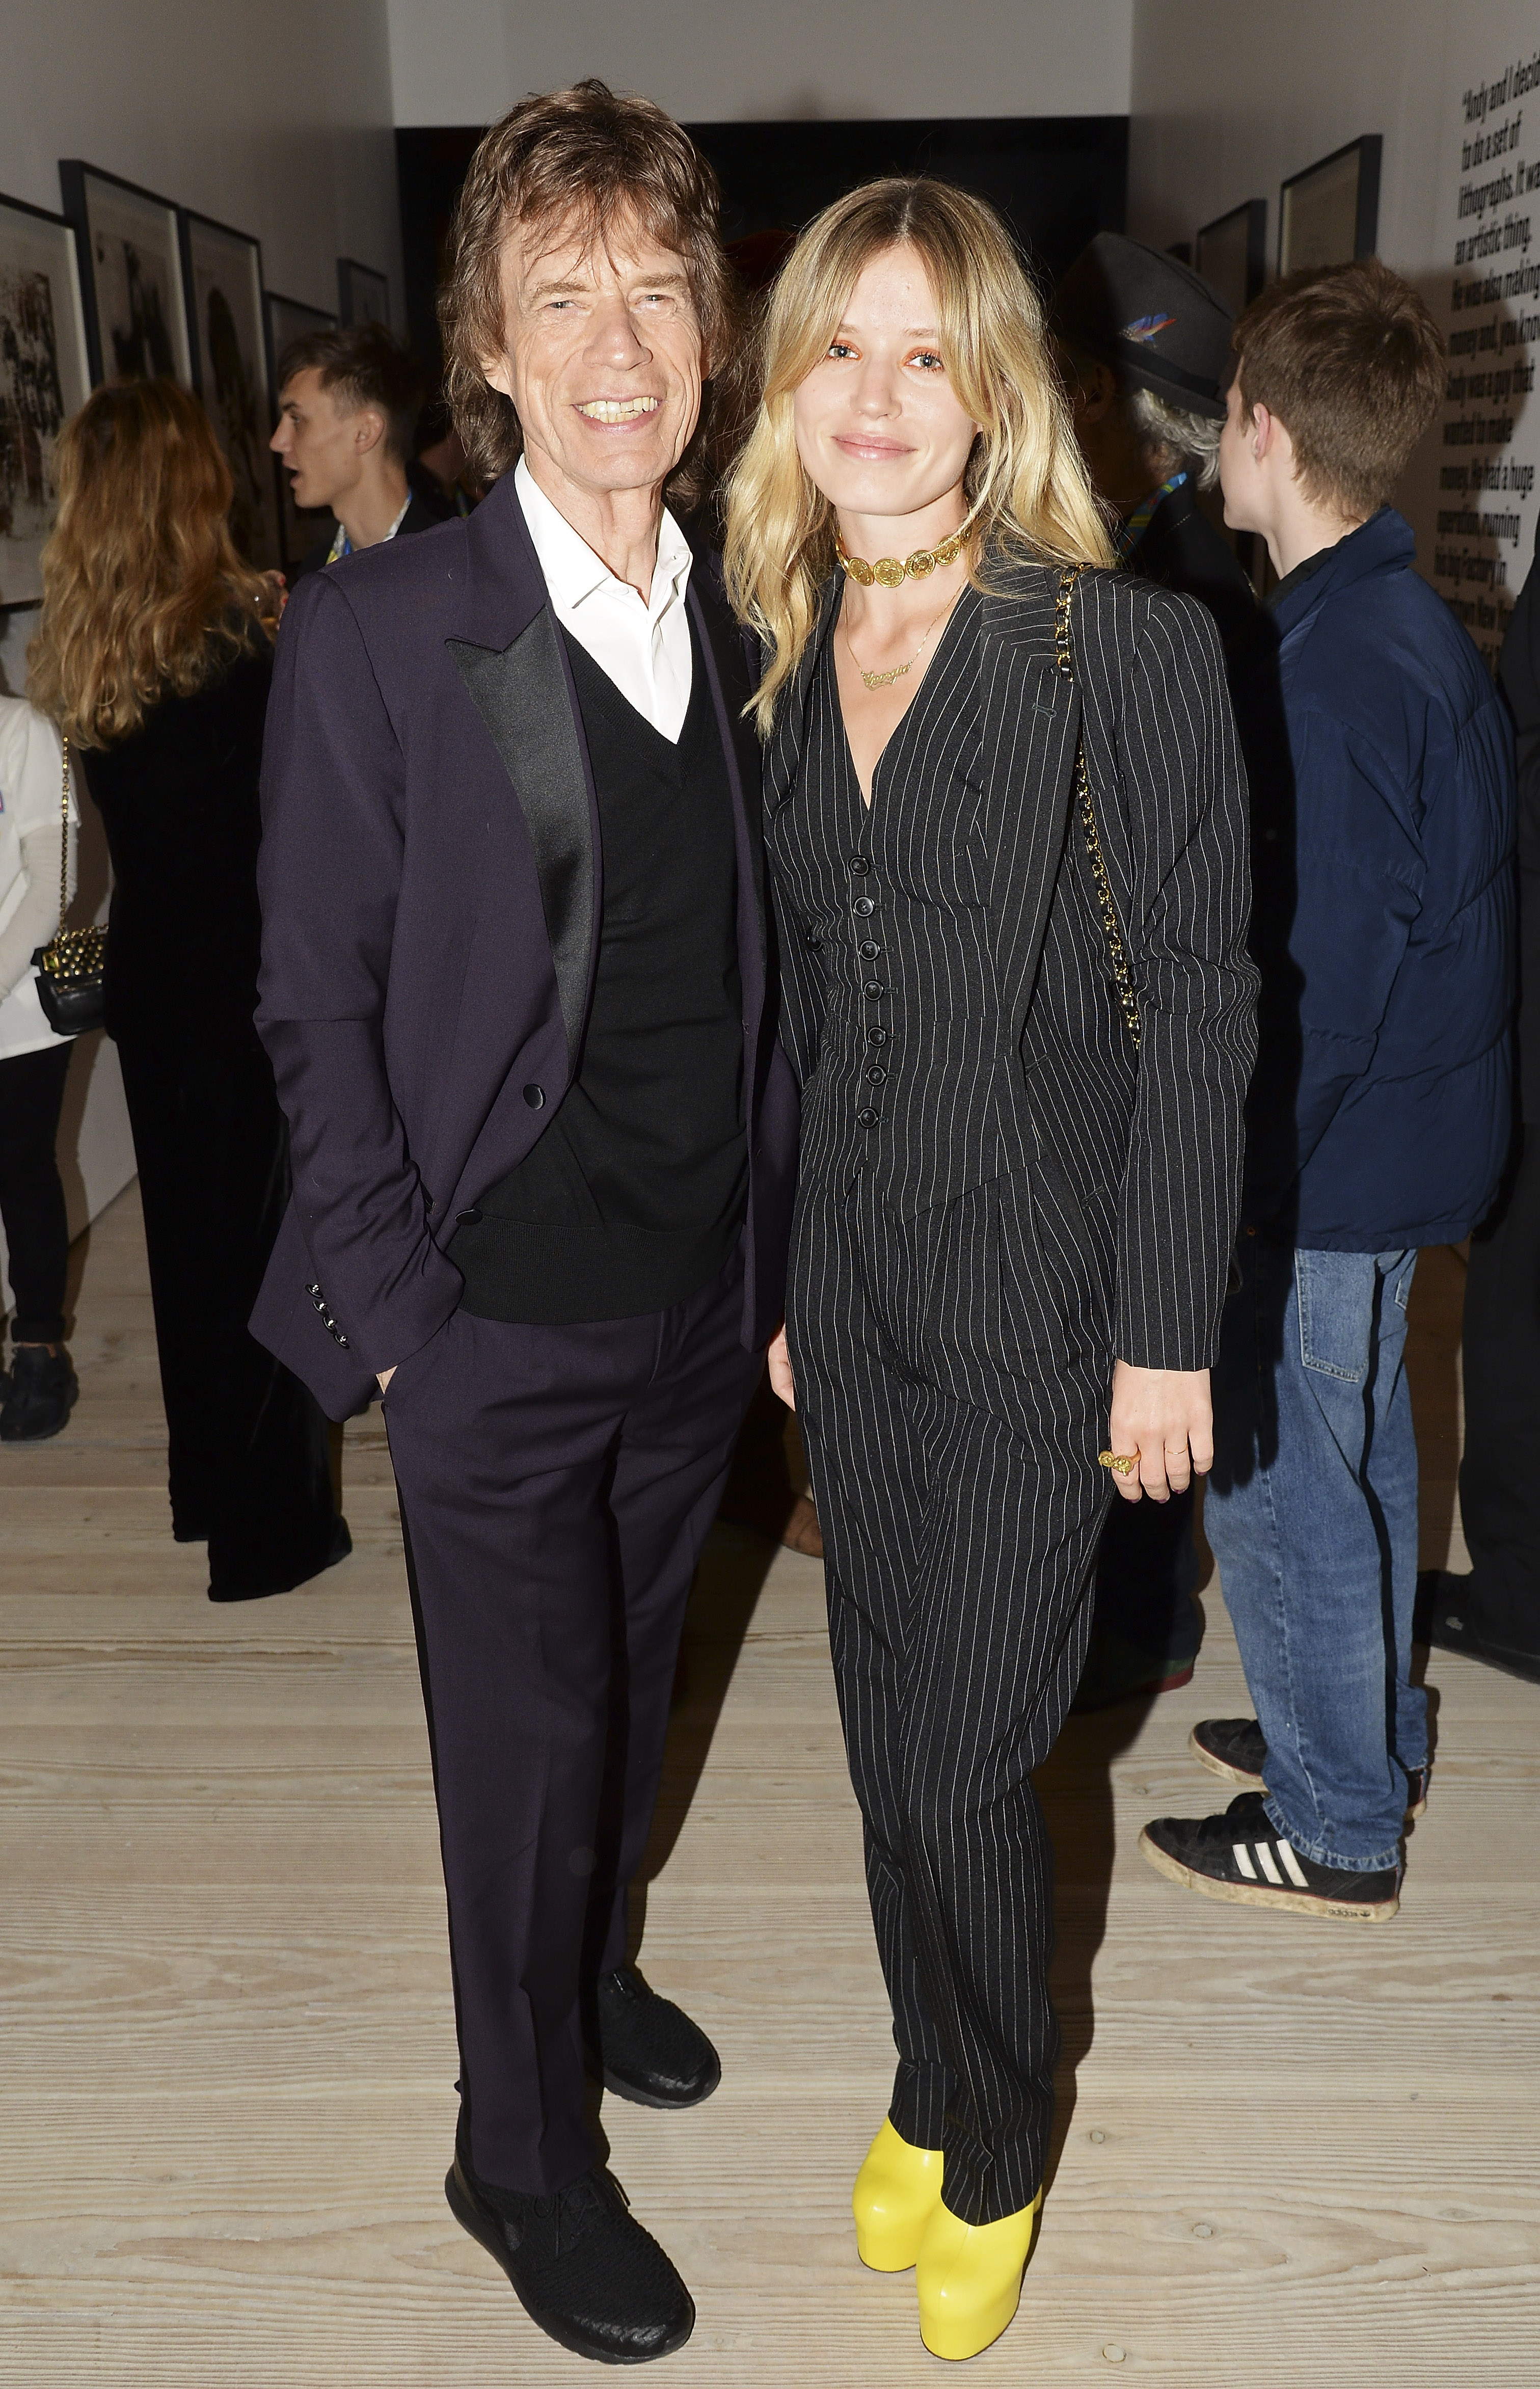 Mick Jagger (L) with daughter Georgia May Jagger during an after party for 'The Rolling Stones: Exhibitionism' at Saatchi Gallery on April 4, 2016 in London, England | Source: Getty Images